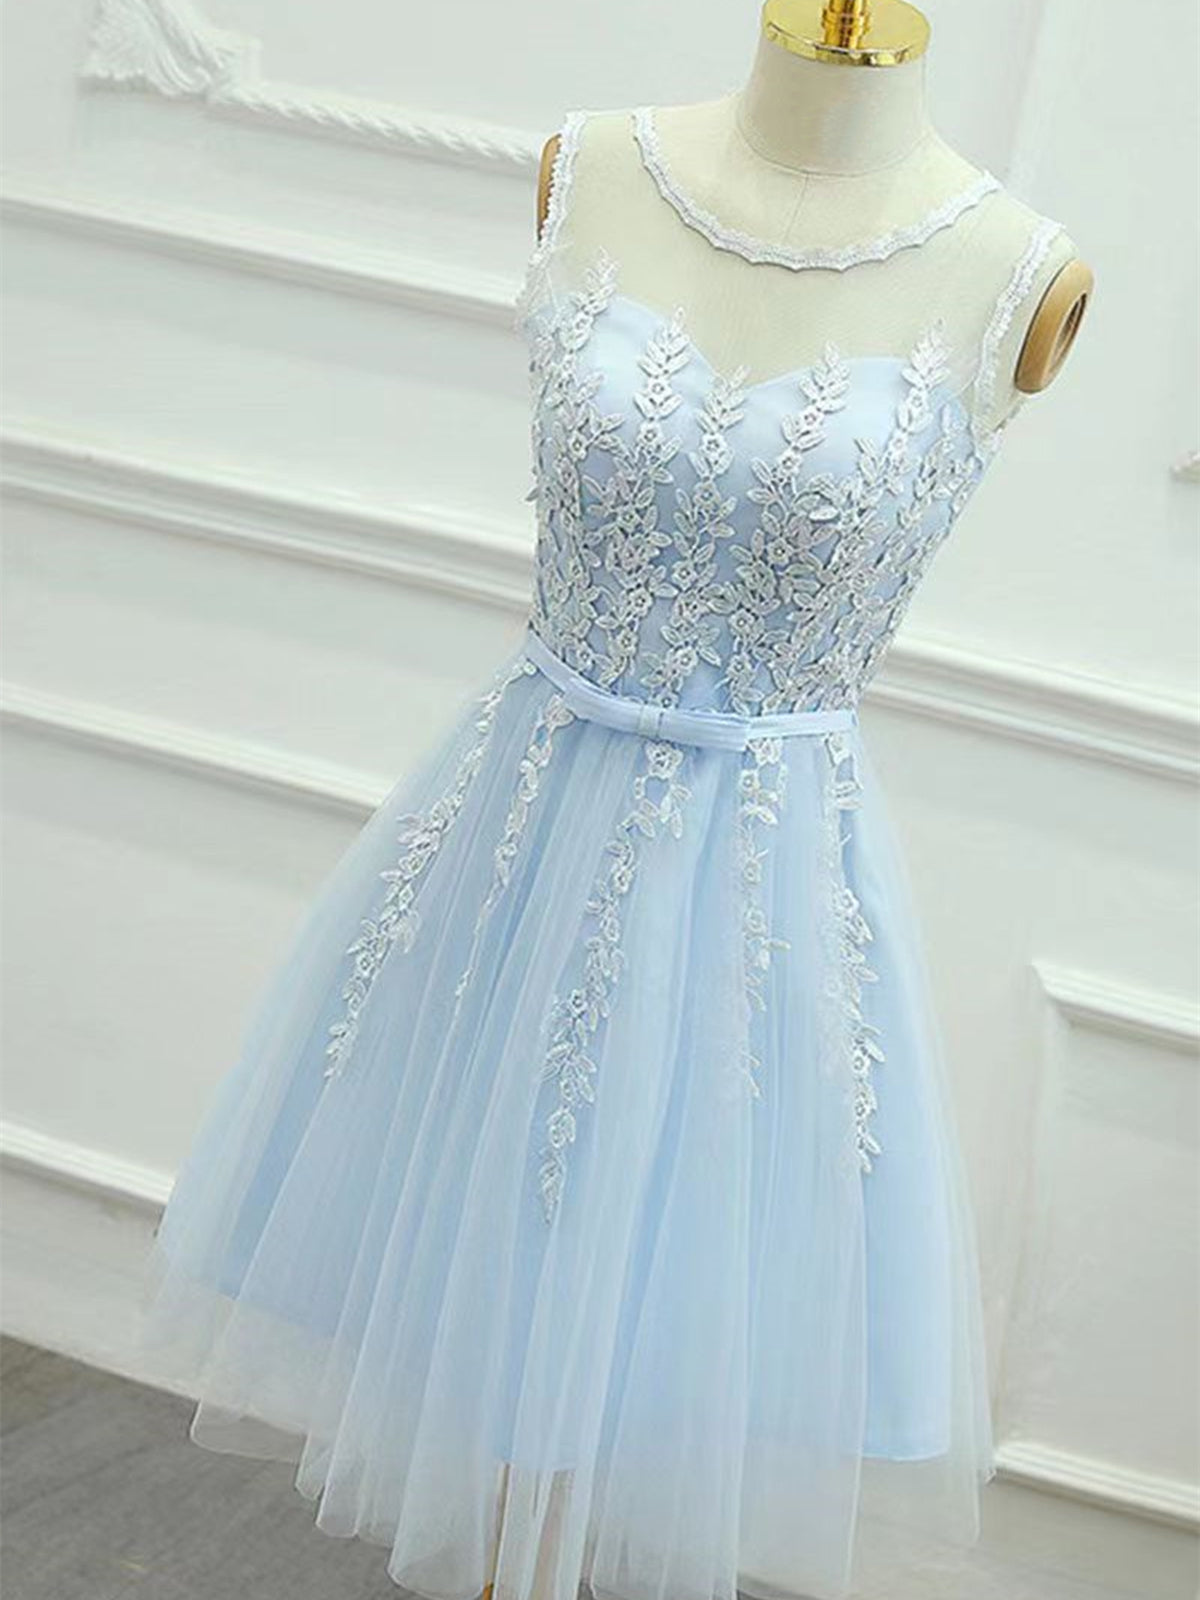 Round Neck Short Blue Lace Corset Prom Dresses, Short Light Blue Lace Corset Formal Graduation Dresses outfit, Fancy Outfit